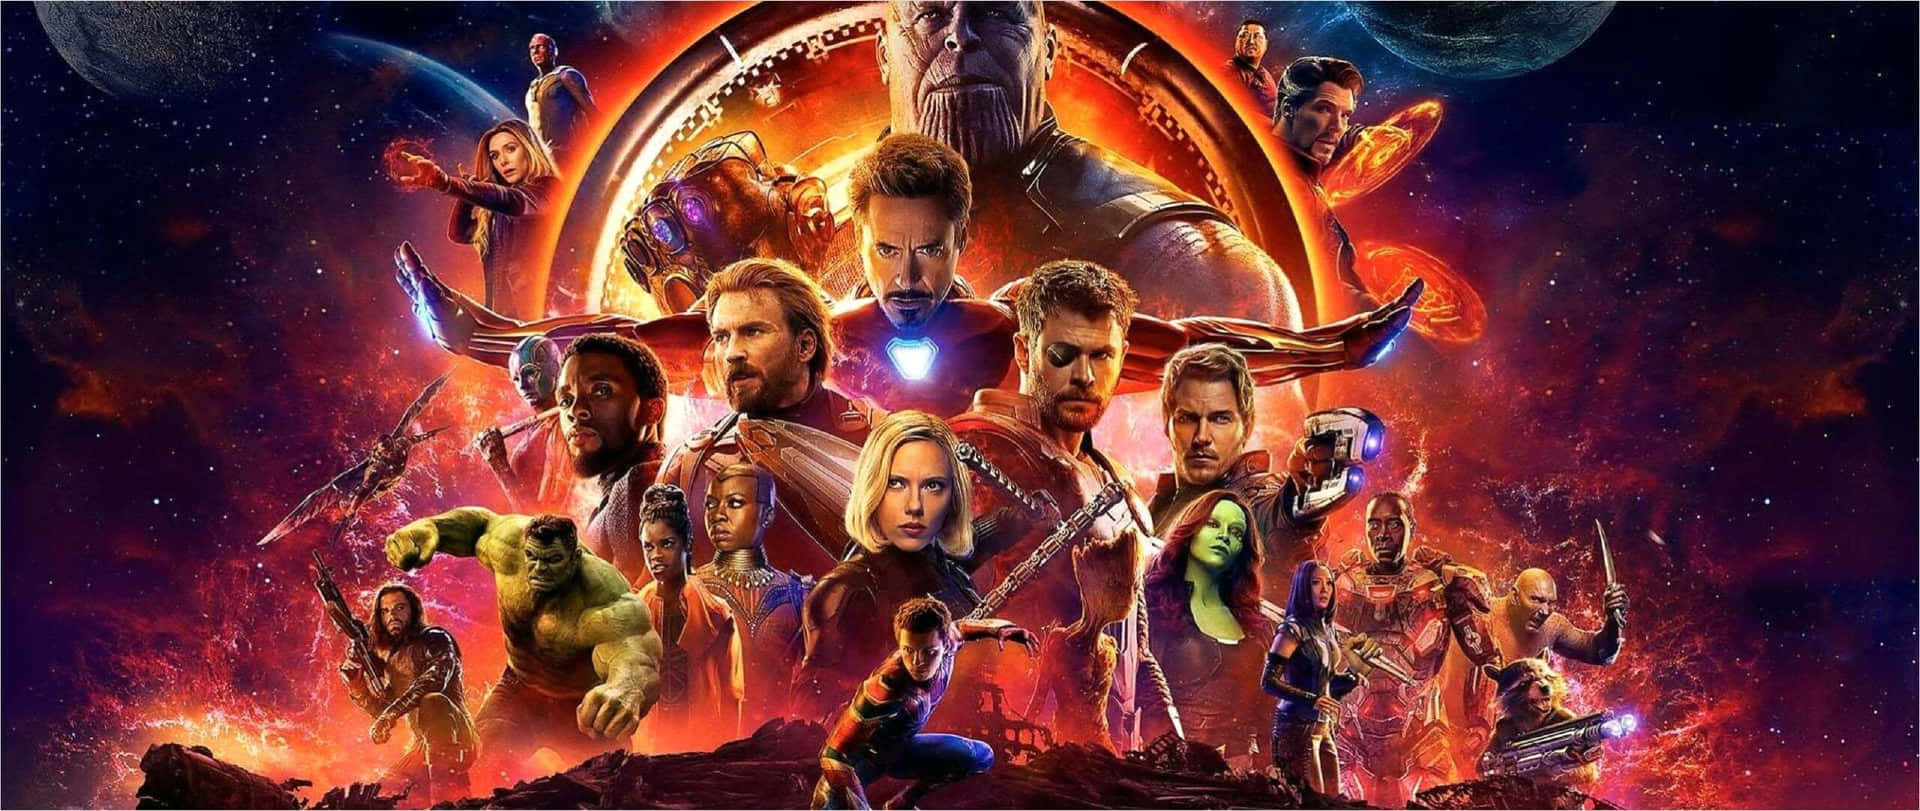 Avengers Infinity War Poster With Many Characters Wallpaper